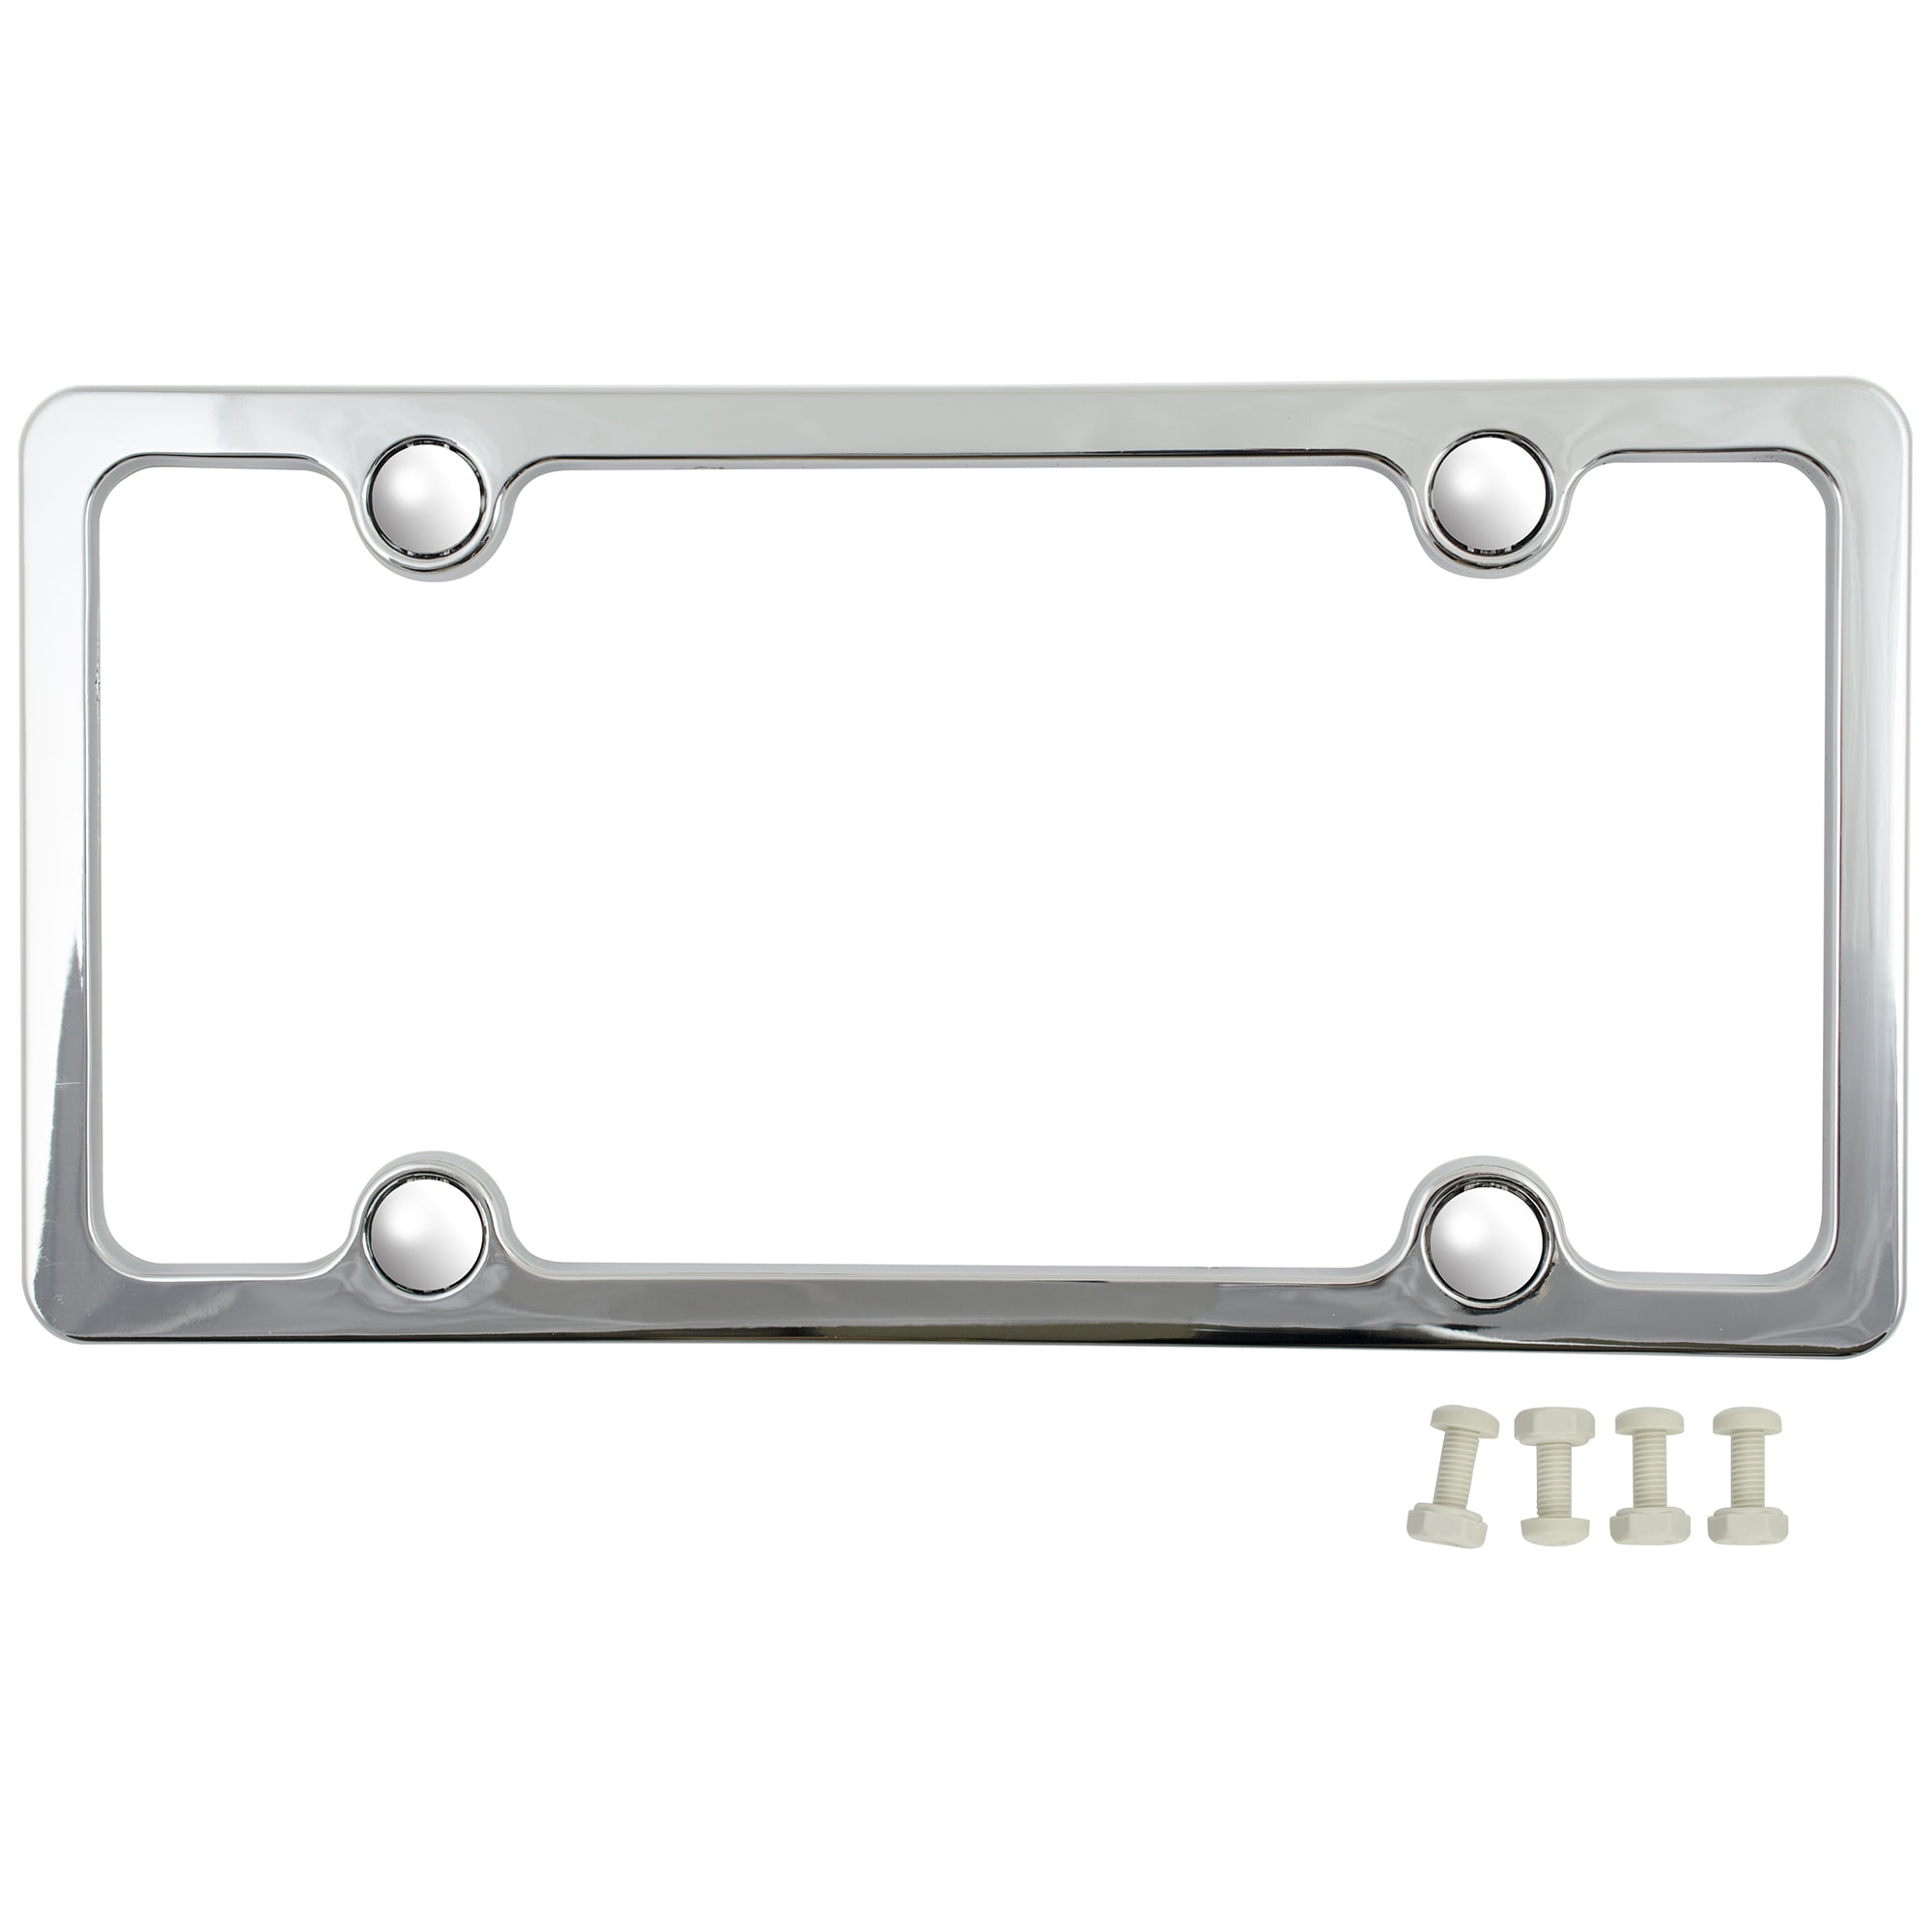 1* CHROME STAINLESS STEEL METAL LICENSE PLATE FRAME & TAG COVER SCREW CAPS